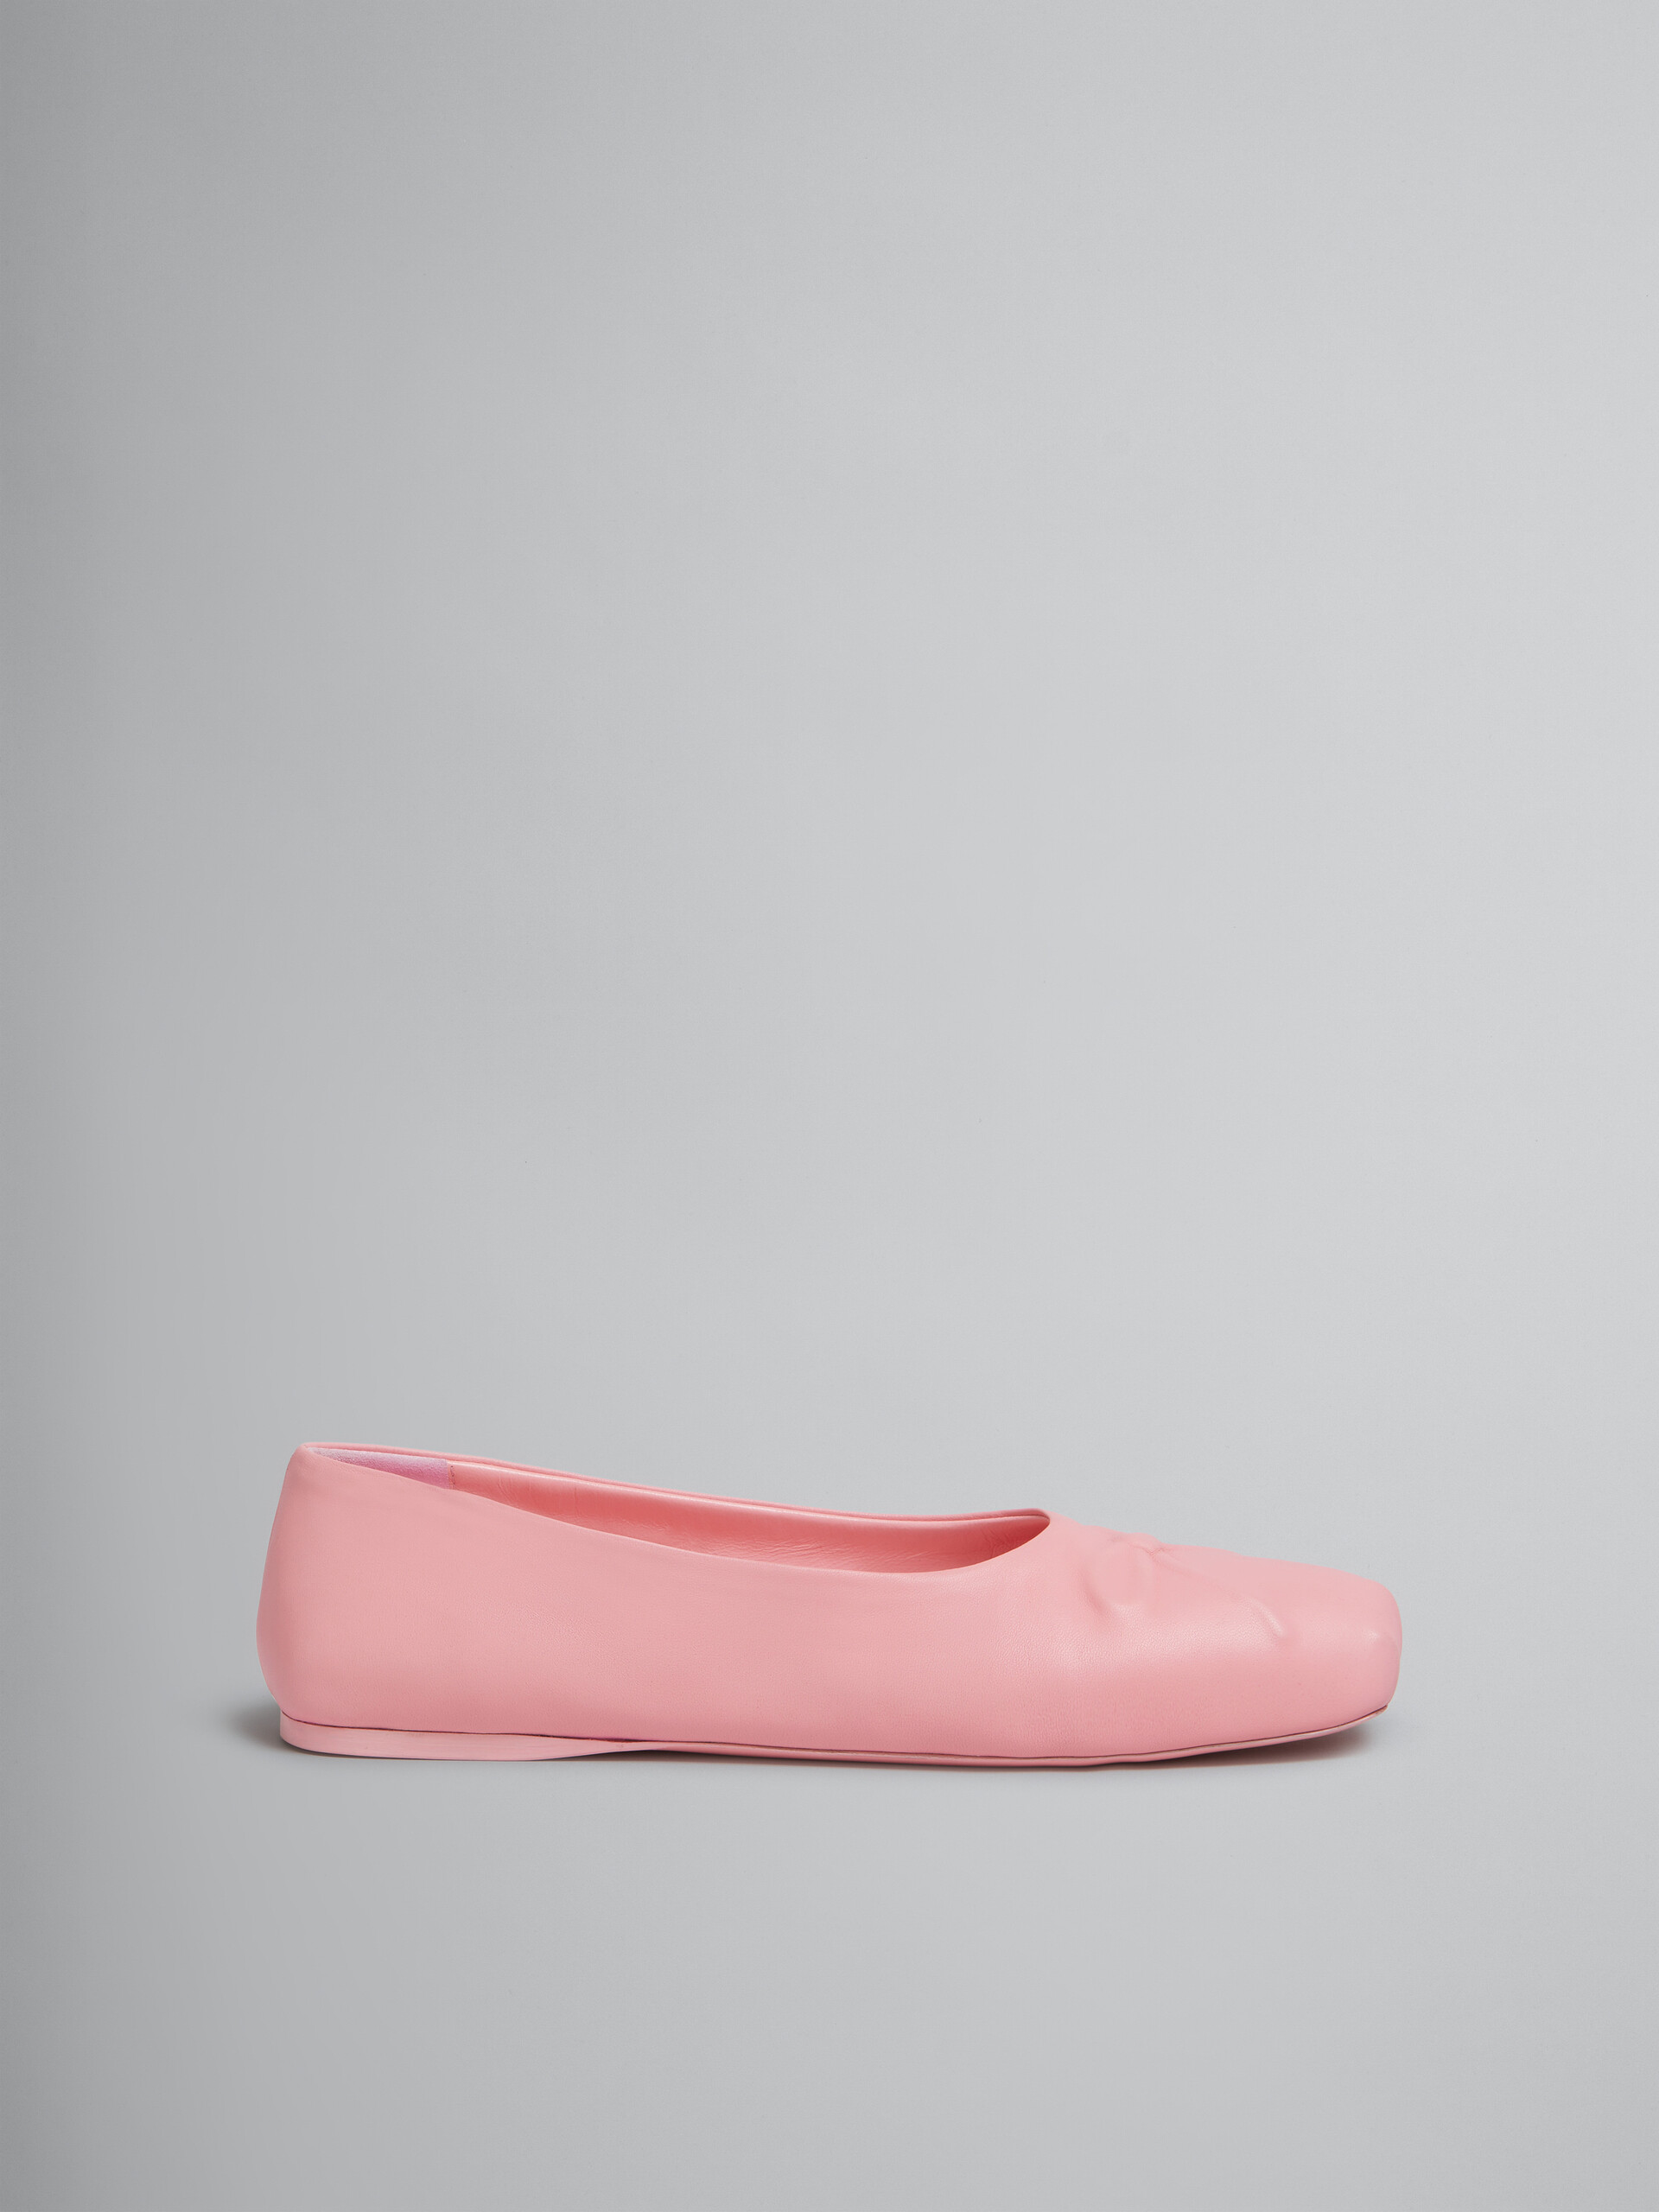 Pink nappa leather seamless Little Bow ballet flat - Ballet Shoes - Image 1